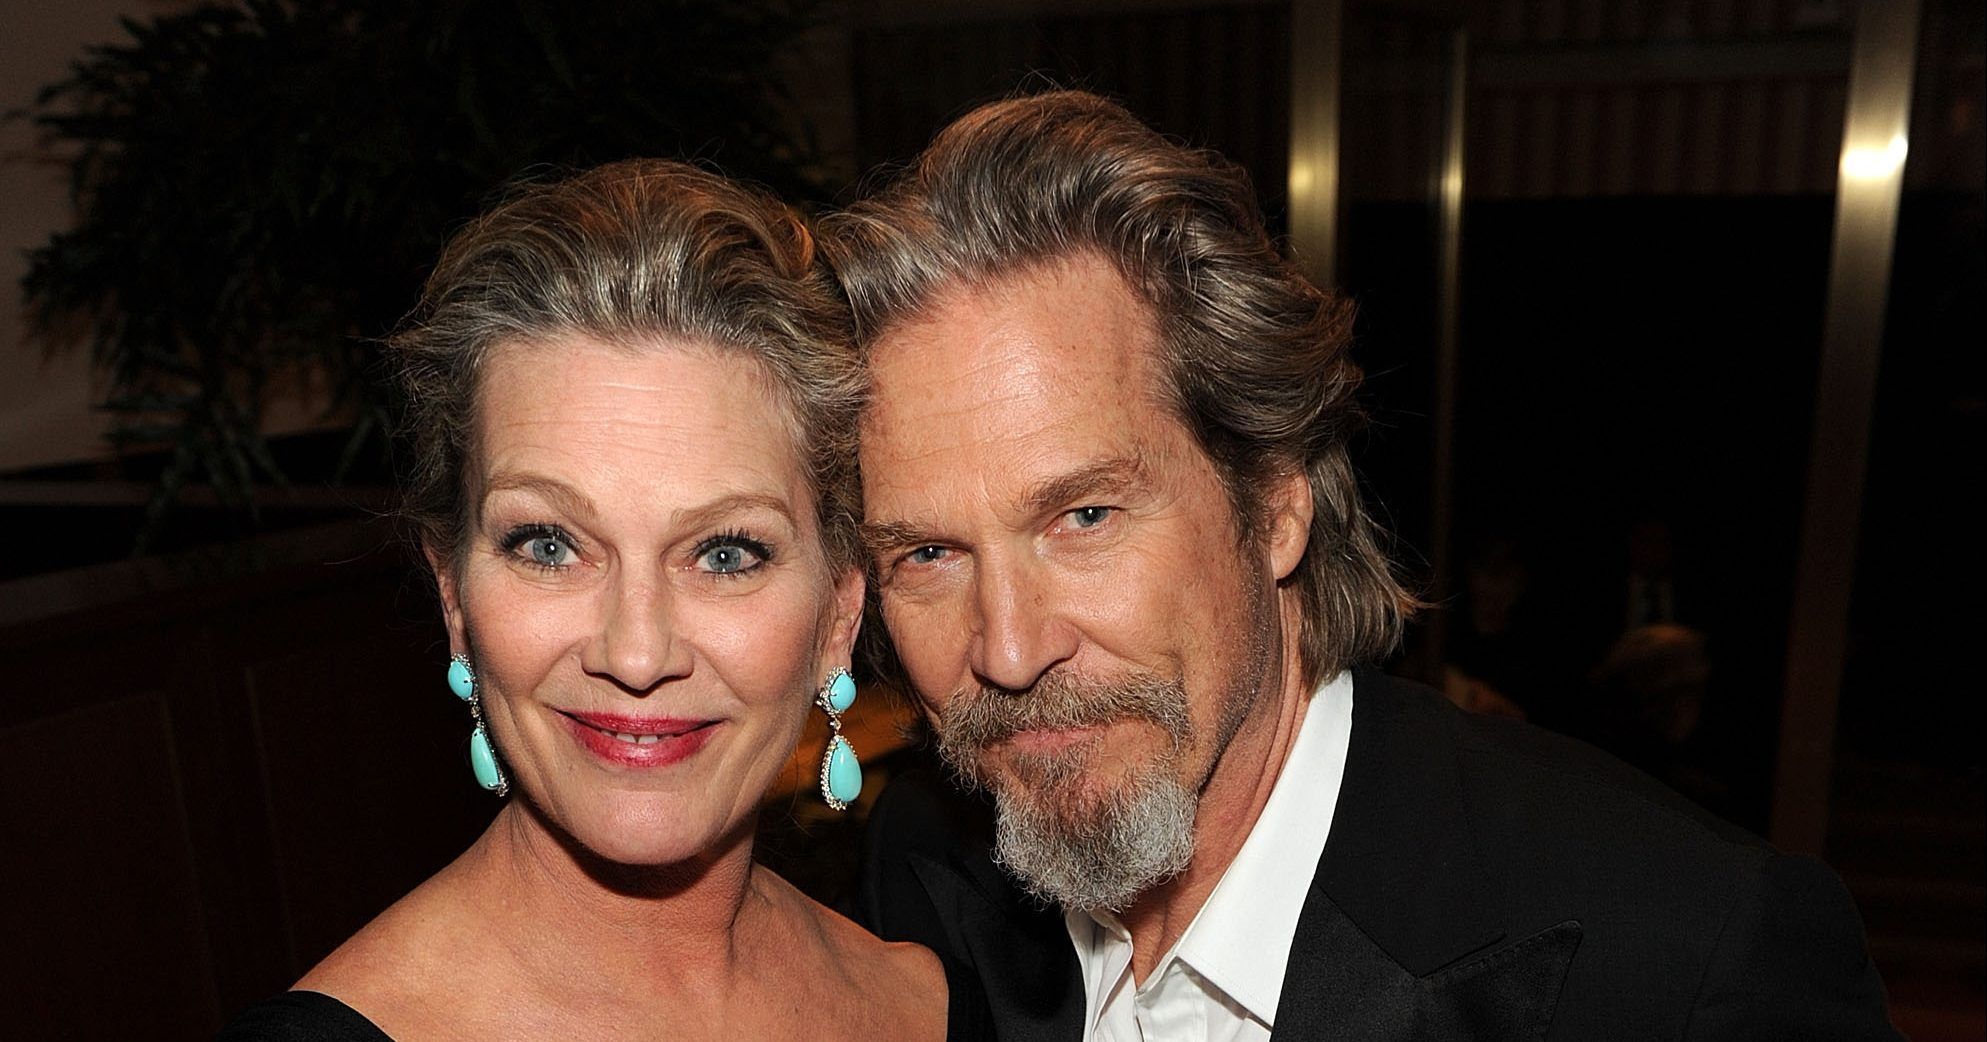 (EXCLUSIVE, Premium Rates Apply) WEST HOLLYWOOD, CA - MARCH 07: *EXCLUSIVE* Susan Getson and Jeff Bridges attends the 2010 Vanity Fair Oscar Party hosted by Graydon Carter at the Sunset Tower Hotel on March 7, 2010 in West Hollywood, California. ***EXCLUSIVE ACCESS SPECIAL RATES APPLY; NO NORTH AMERICAN ON-AIR BROADCAST UNTIL MARCH 14TH, 2010*** (Photo by Kevin Mazur/VF1/WireImage)